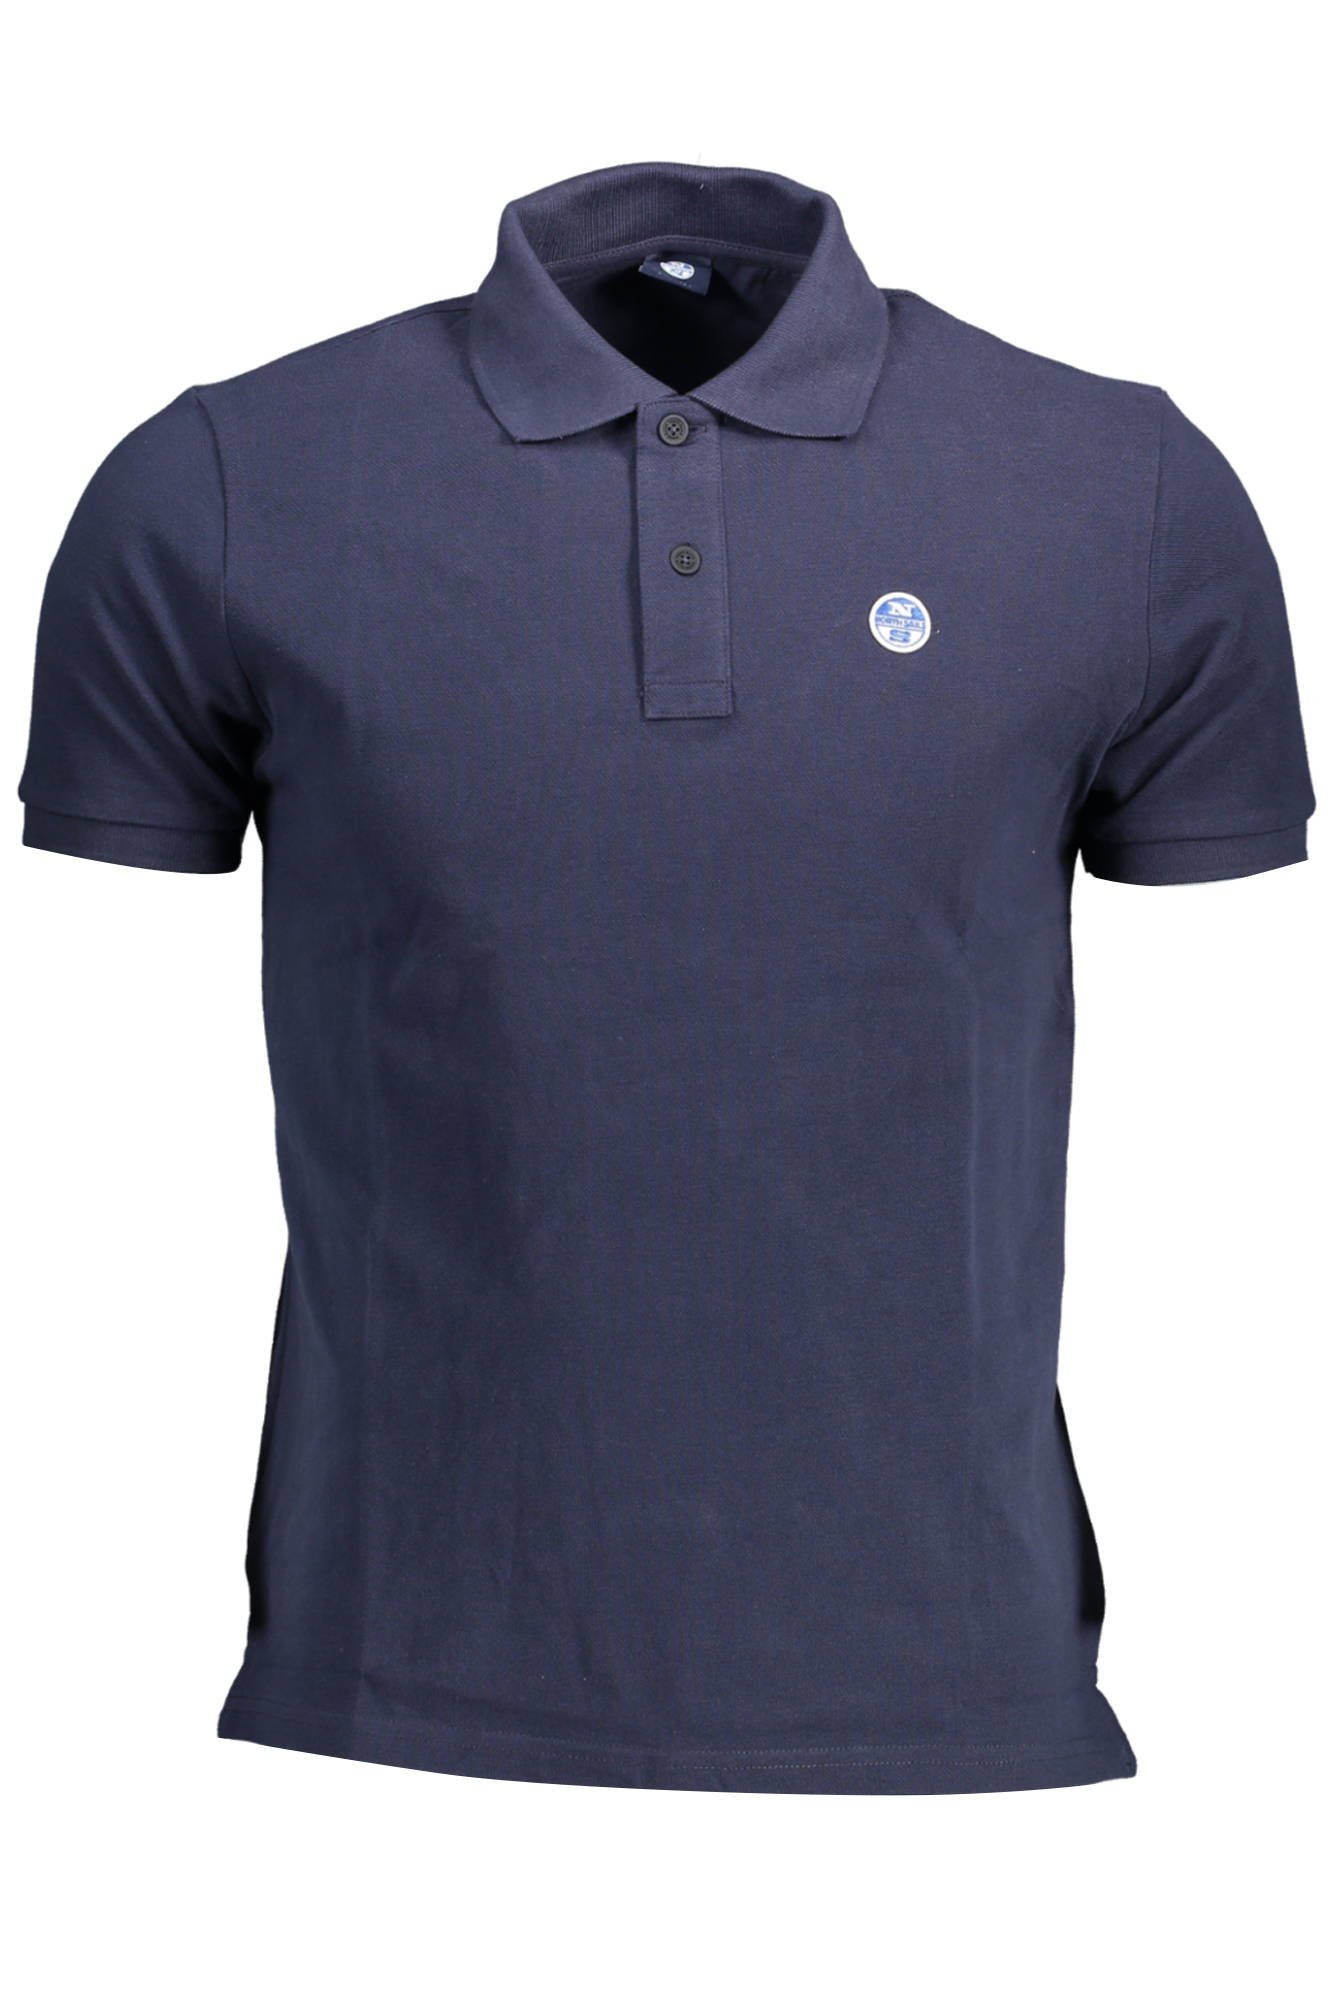 Polos manches courtes  North sails 692352-000 0802 NAVY BLUE